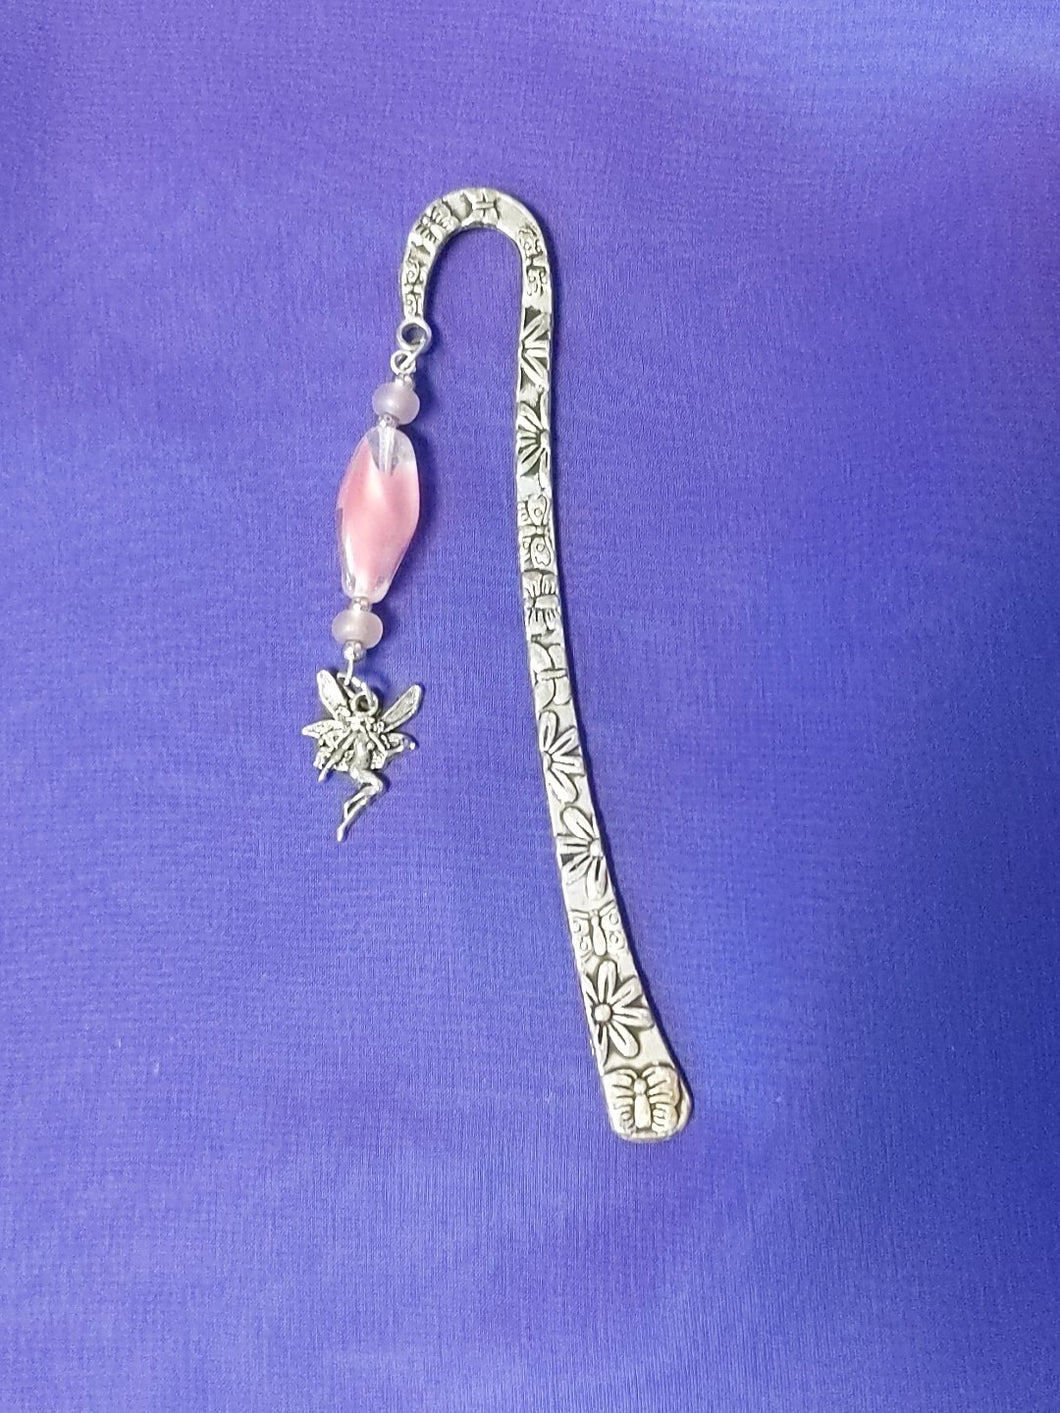 Metal Book Mark with Charm - Faerie